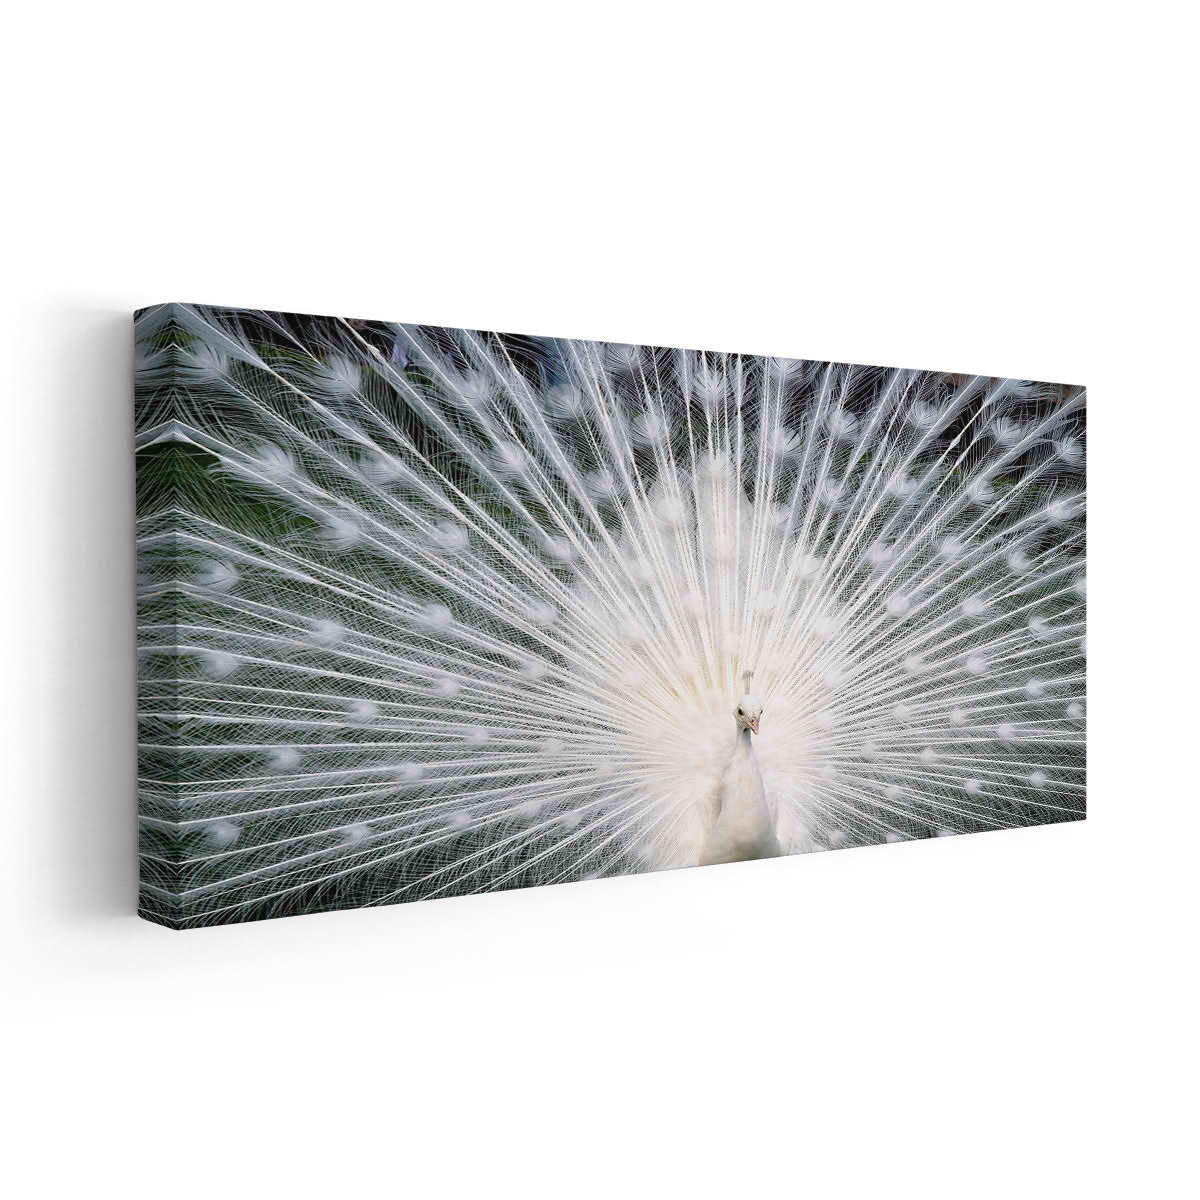 White Peacock Wall Art Canvas-Stunning Canvas Prints